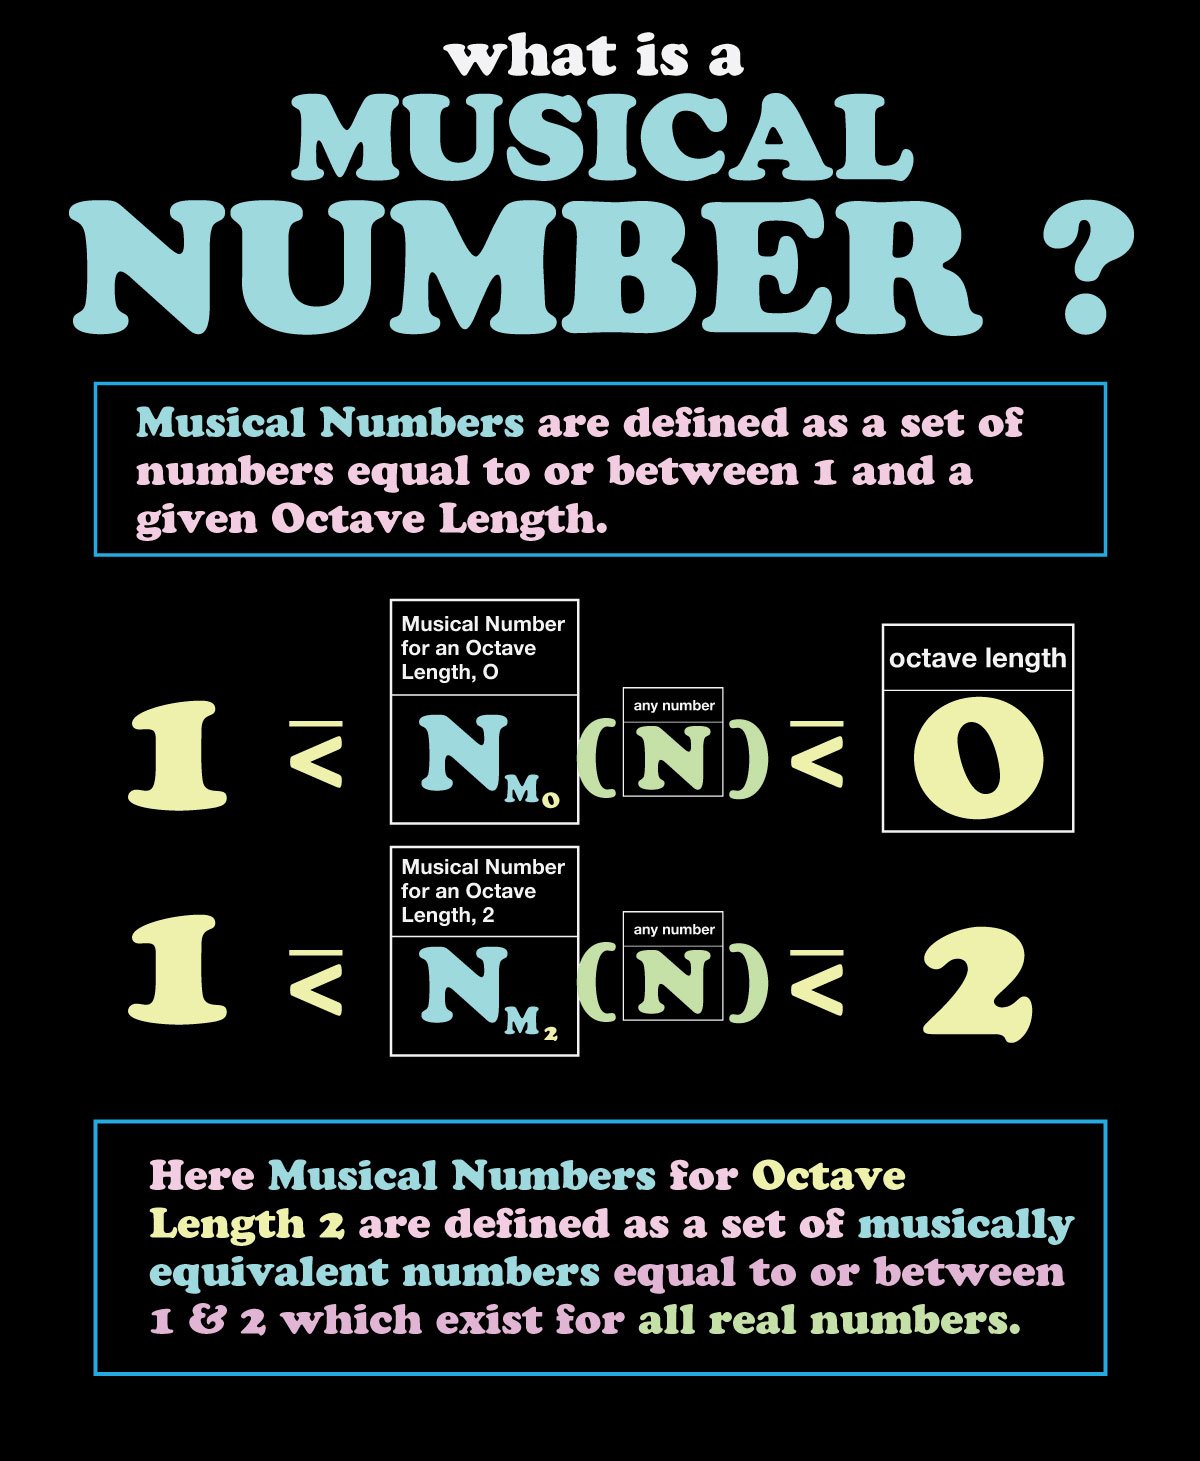 a-musical-number-defined-by-range.jpg